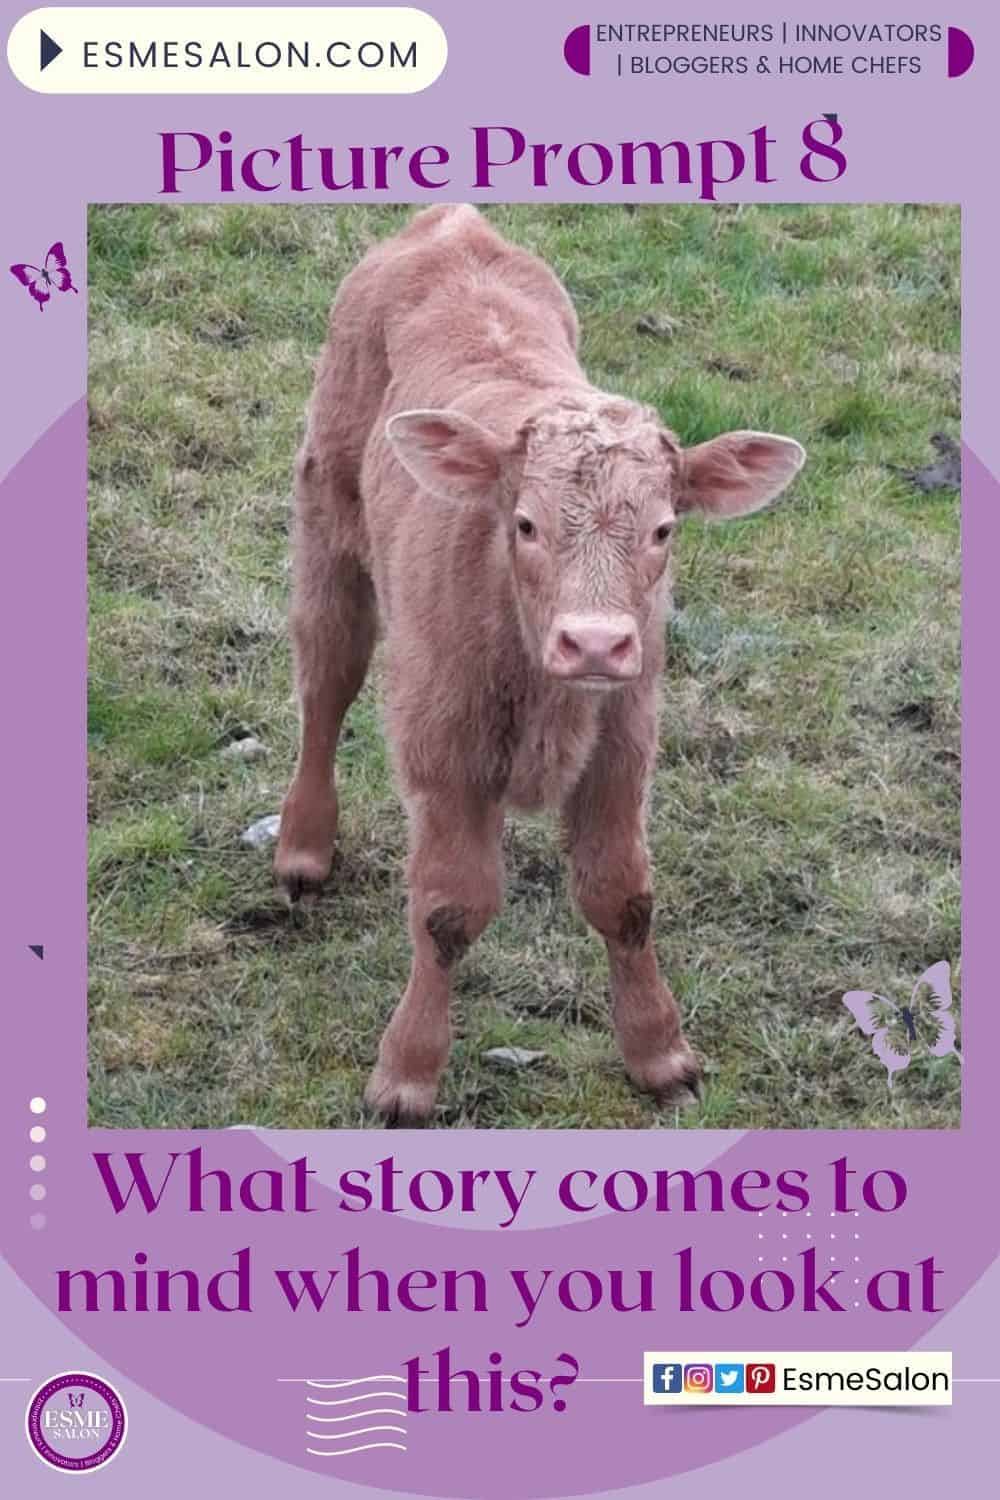 Image of a Calf in the field - Picture Prompt 8